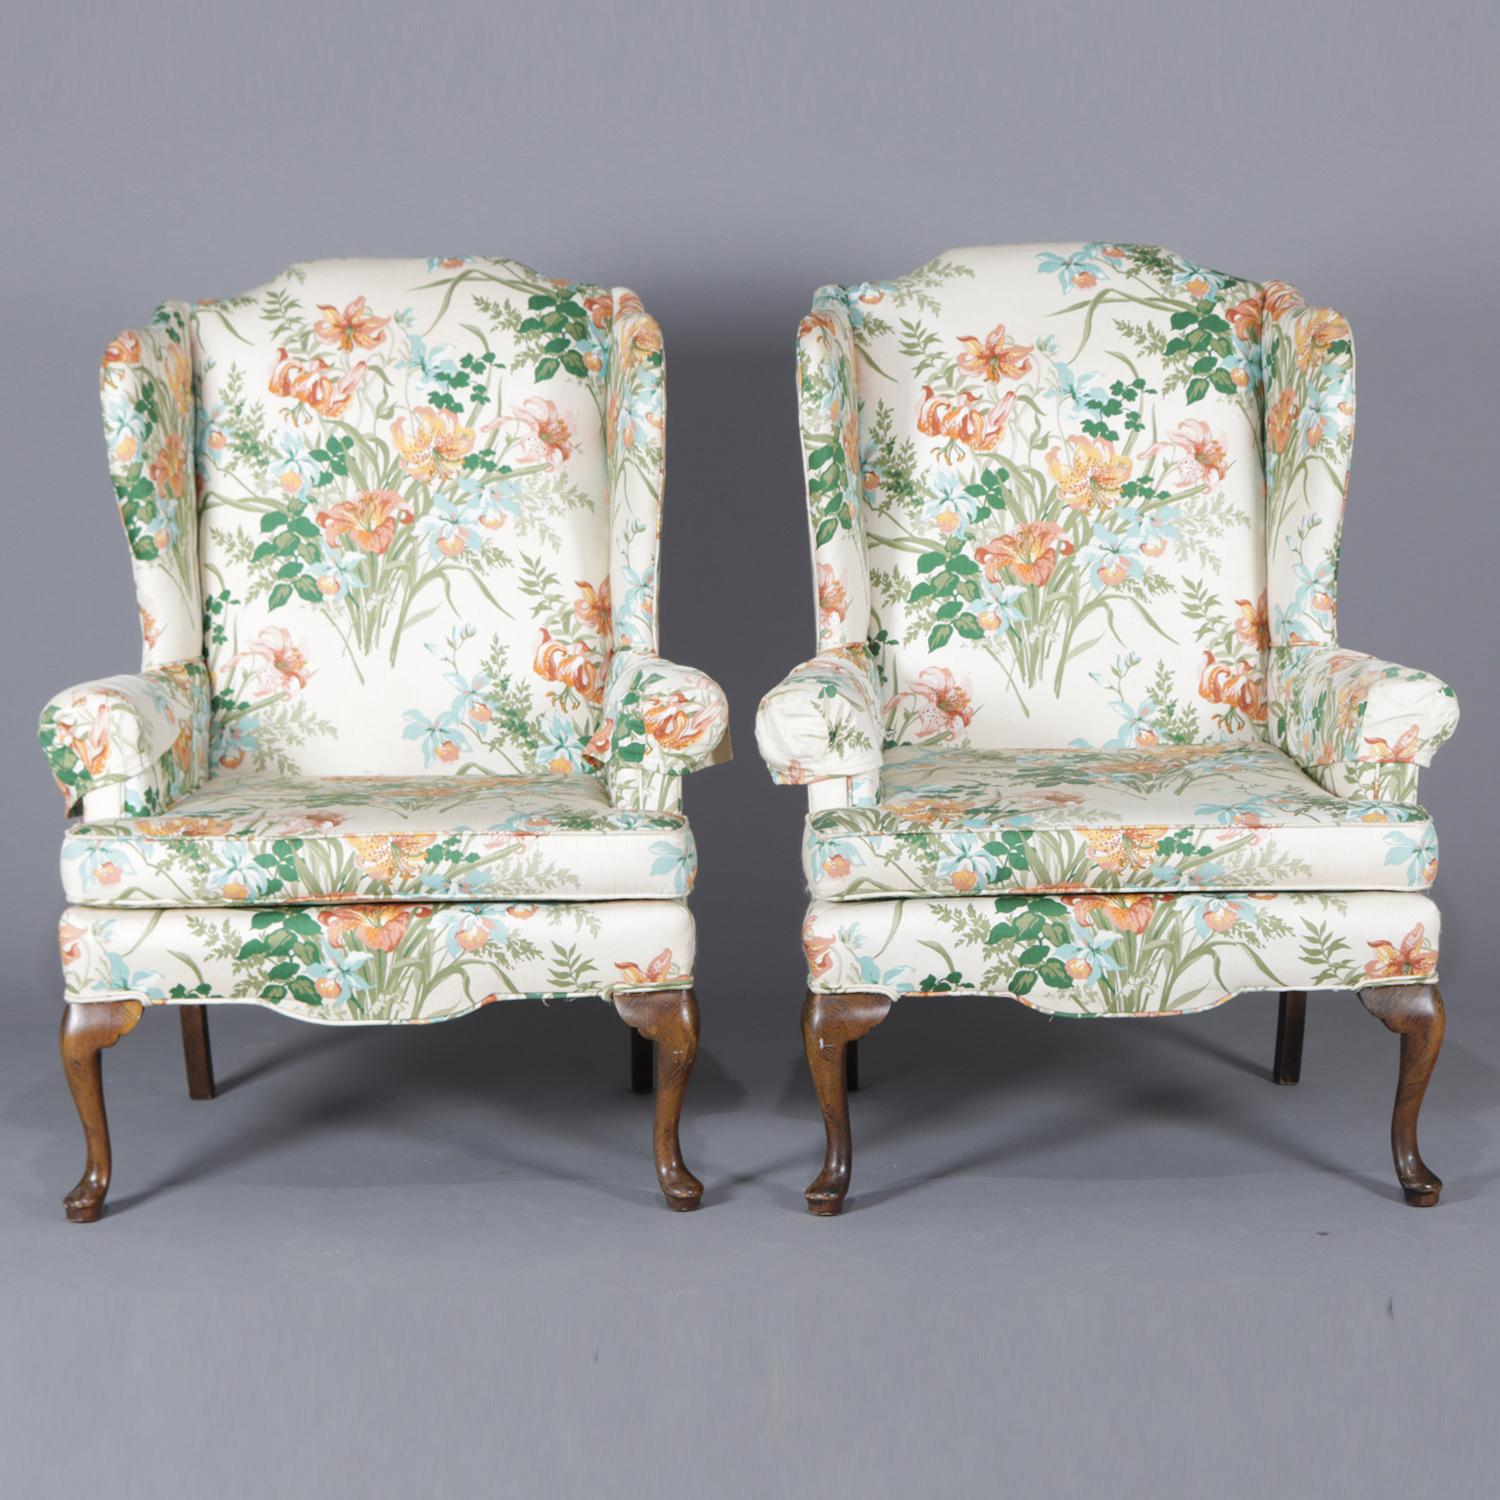 Pair of Queen Anne style fireside wingback chairs feature floral tiger lily print upholstery, circa 1930.

Measures: 44